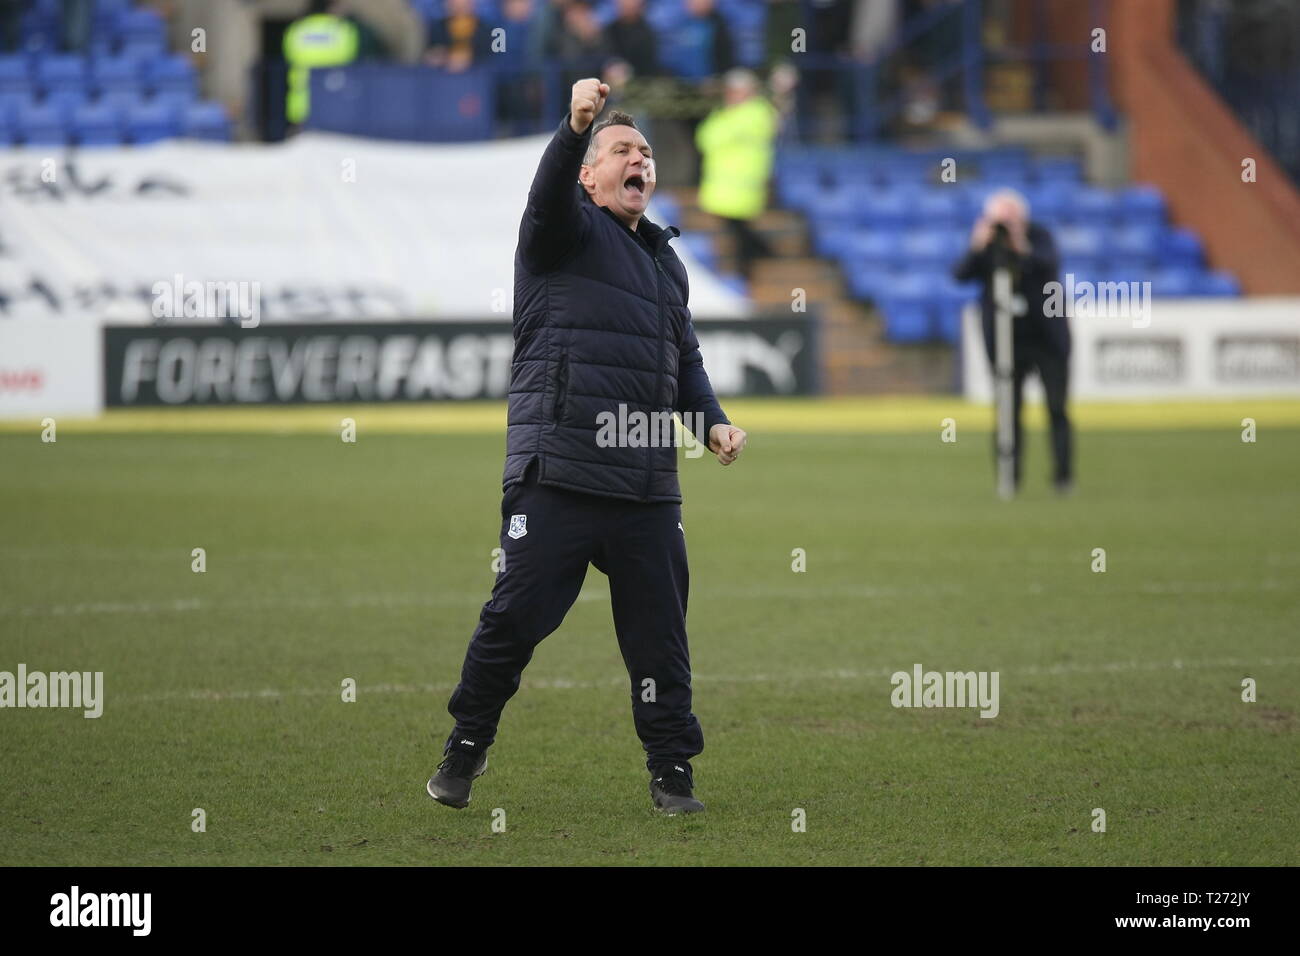 Birkenhead, Wirral, UK. 30th March, 2019. Tranmere Rovers Manager Micky Mellon salutes Tranmere fans after the EFL League Two match with Carlisle United at Prenton Park which Tranmere Rovers won 3-0. Stock Photo